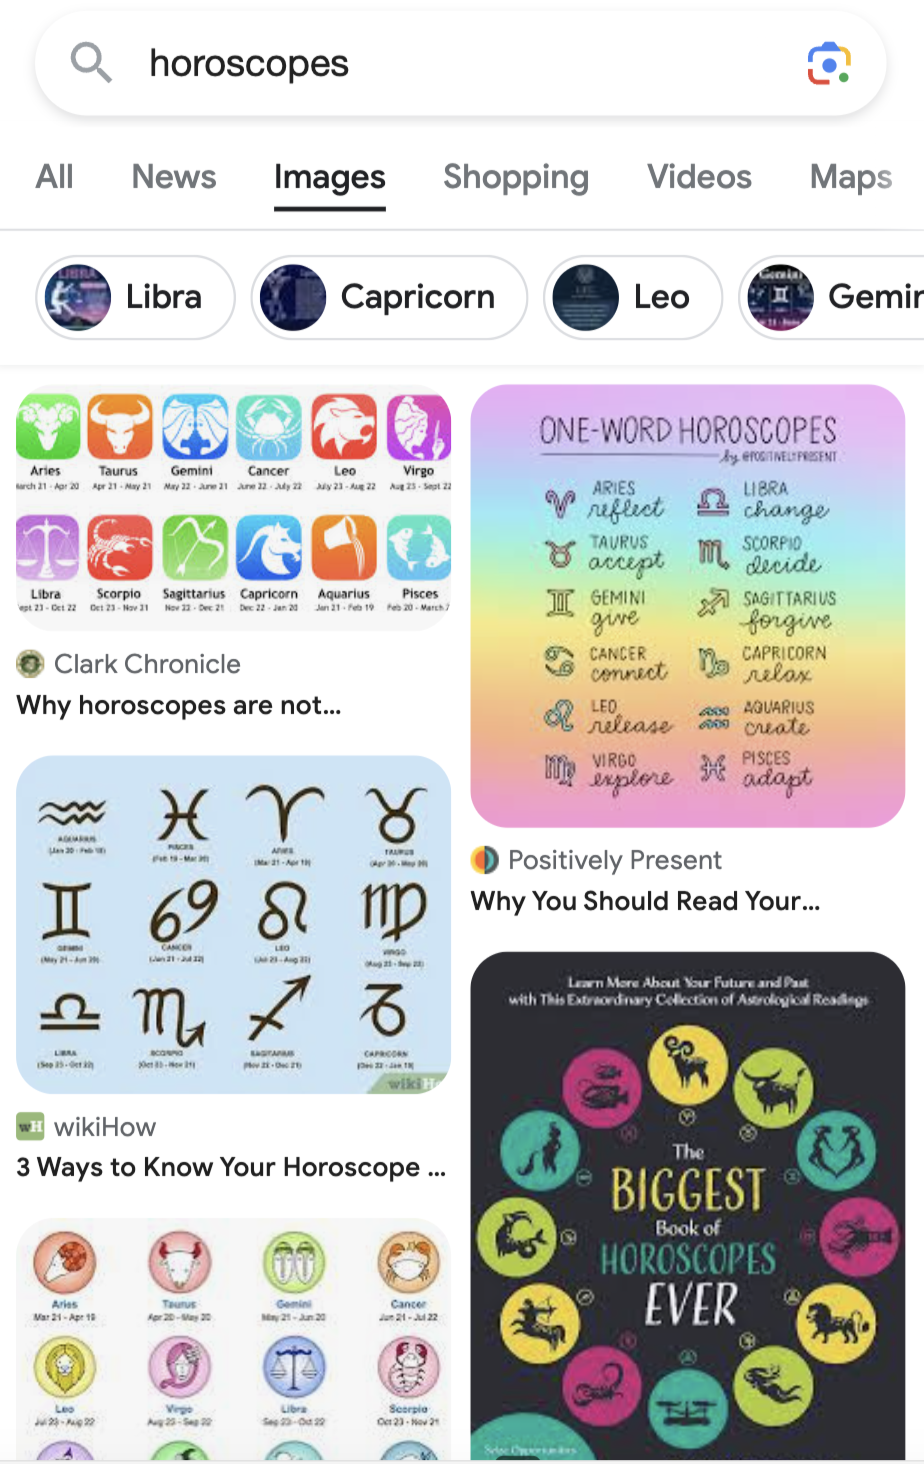 Google “Images” results for "horoscopes" on mobile device